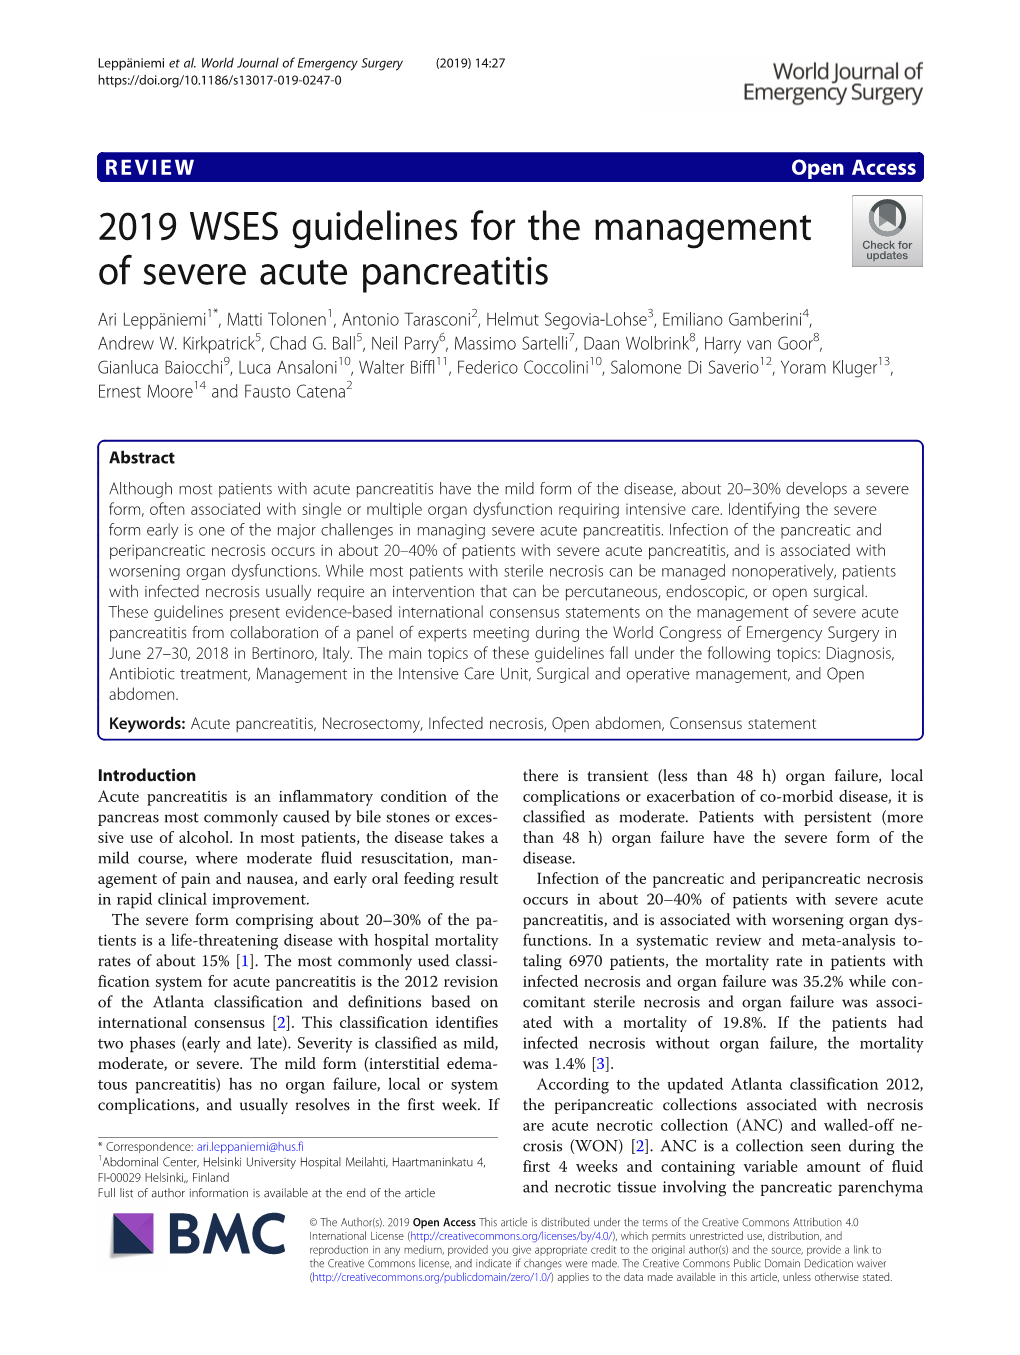 2019 WSES Guidelines for the Management of Severe Acute